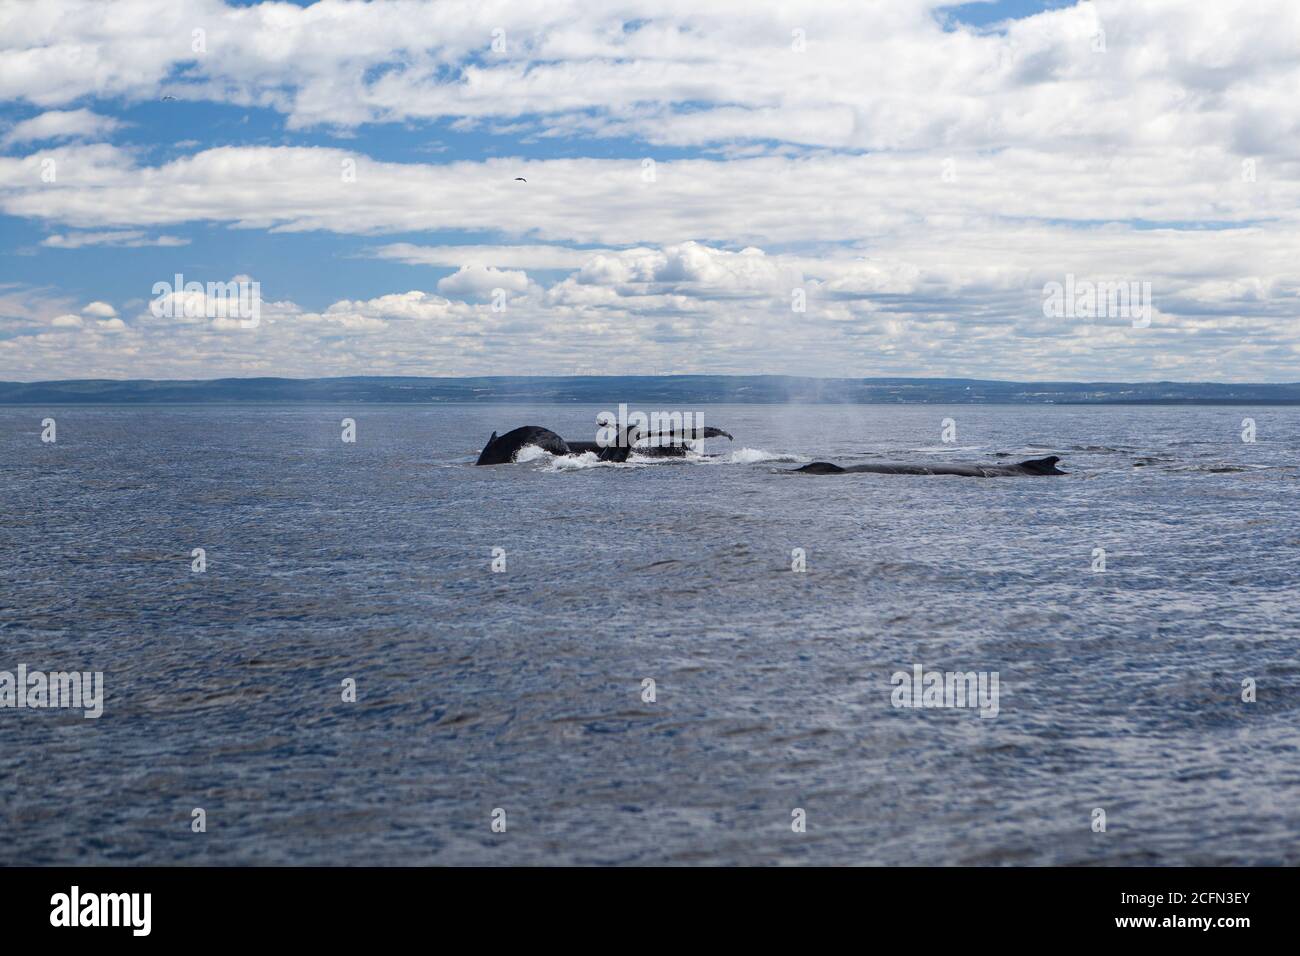 Whale watching In Tadoussac, Quebec, Canada on Saint Lawrence river Stock Photo